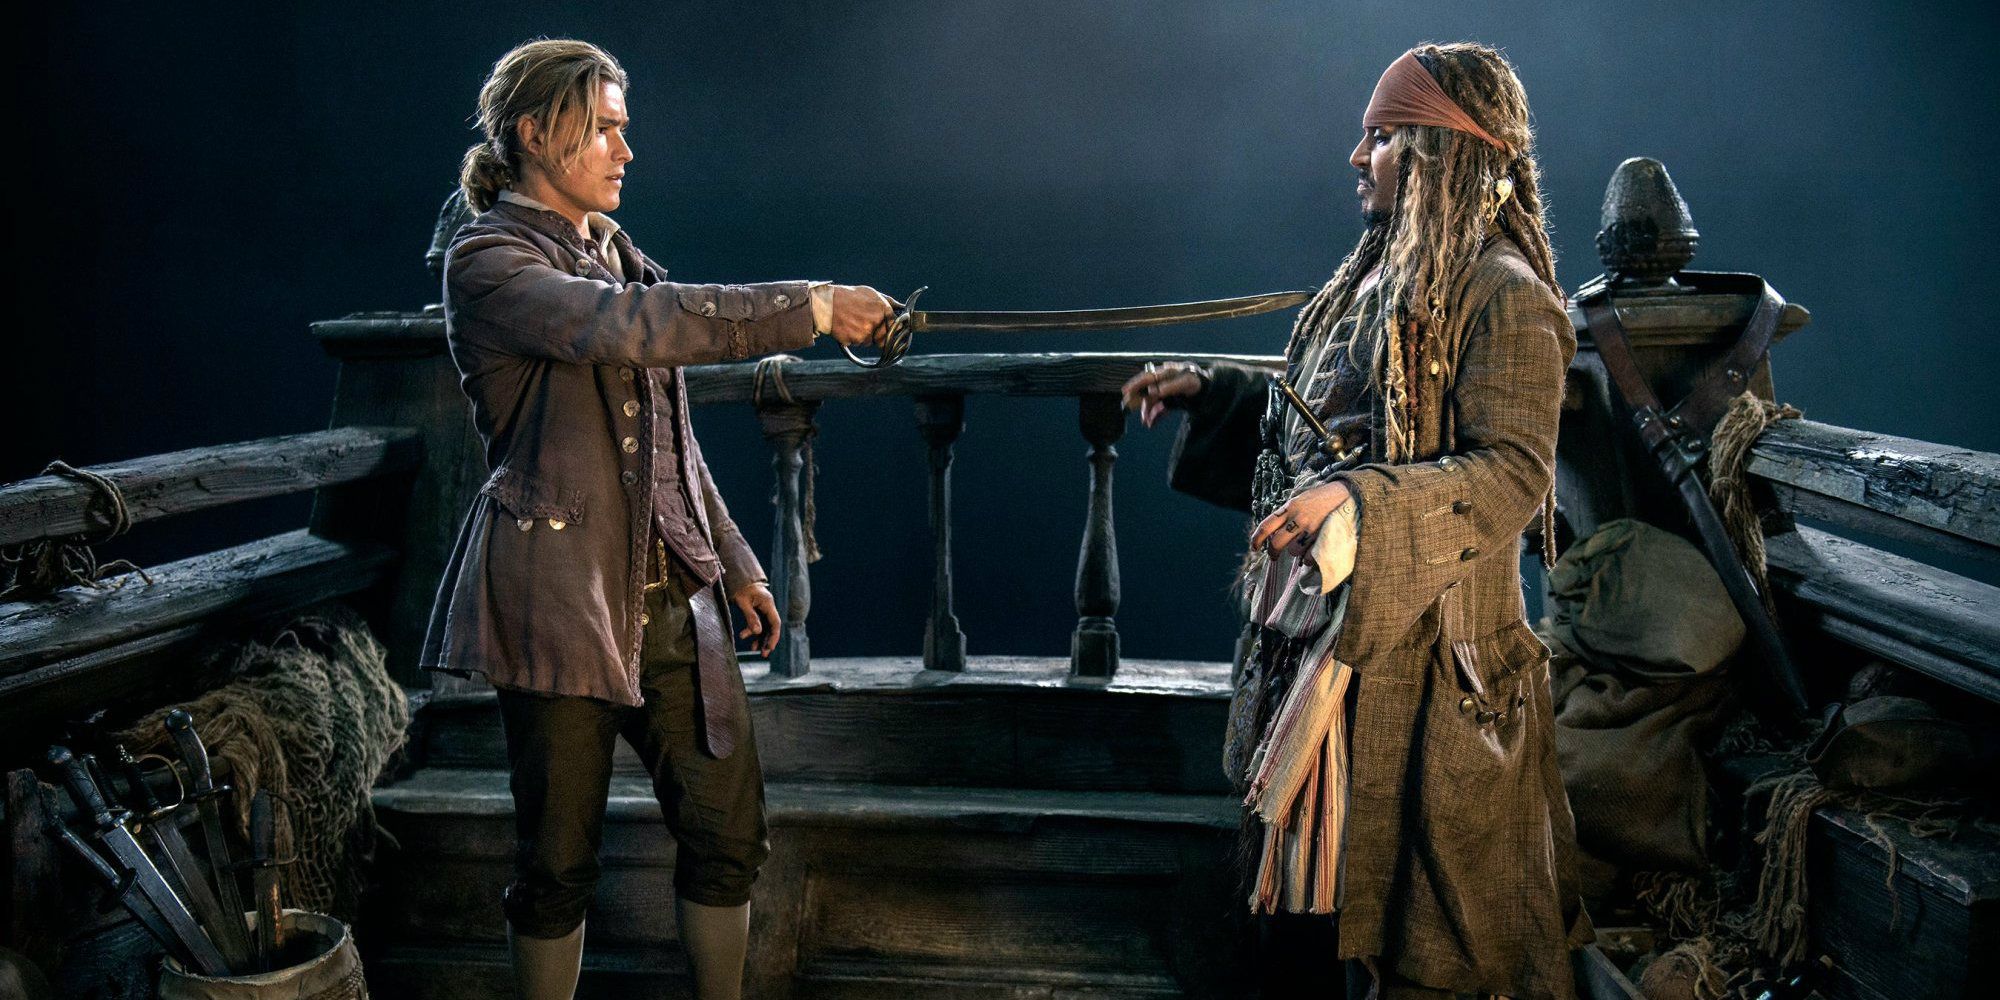 Pirates Of The Caribbean 5 Deleted Scenes They Shouldve Kept In (& 5 Were Glad They Cut)